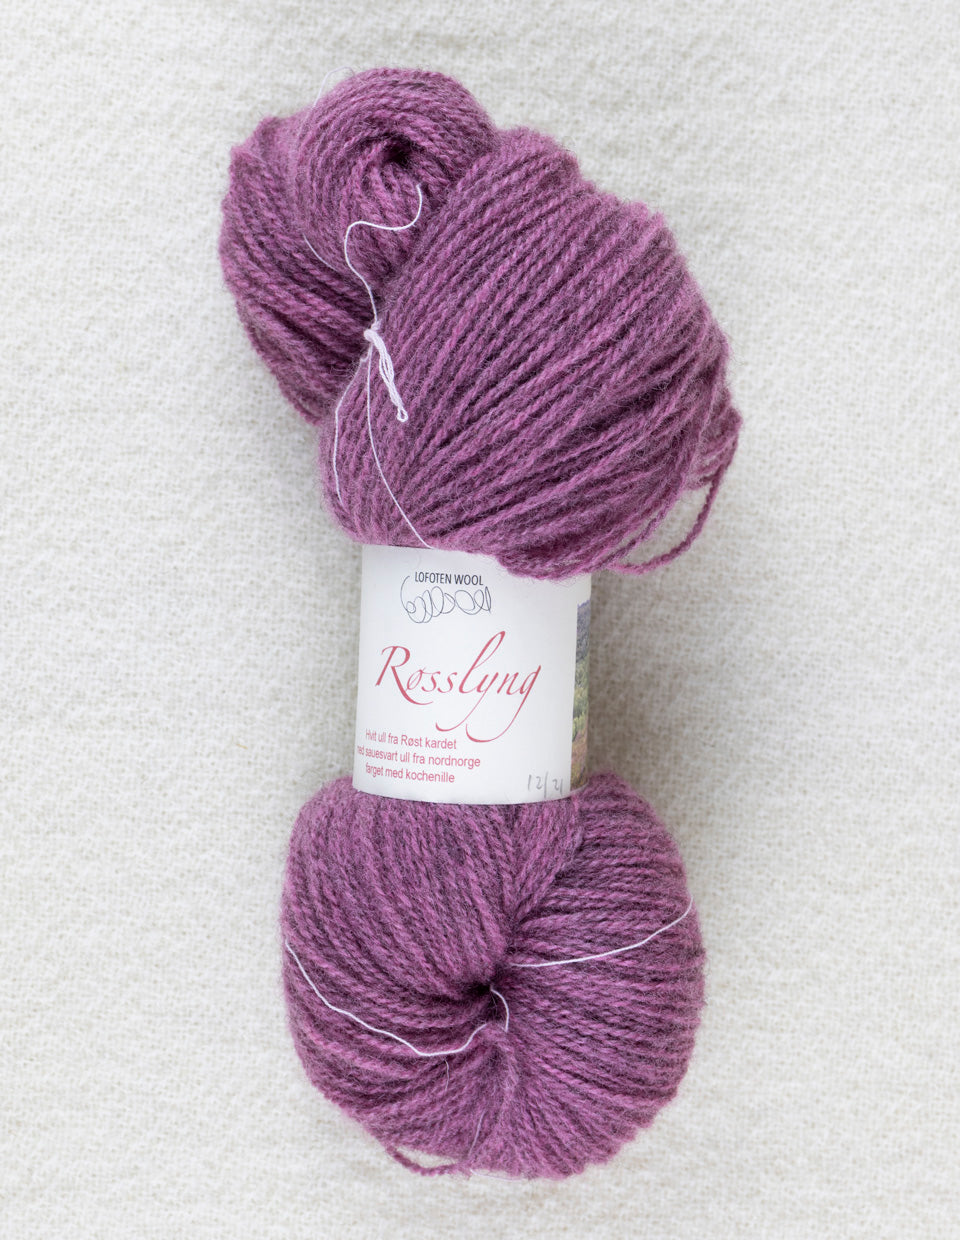 Røsslyng 3 ply, 50/100g, (Heather)